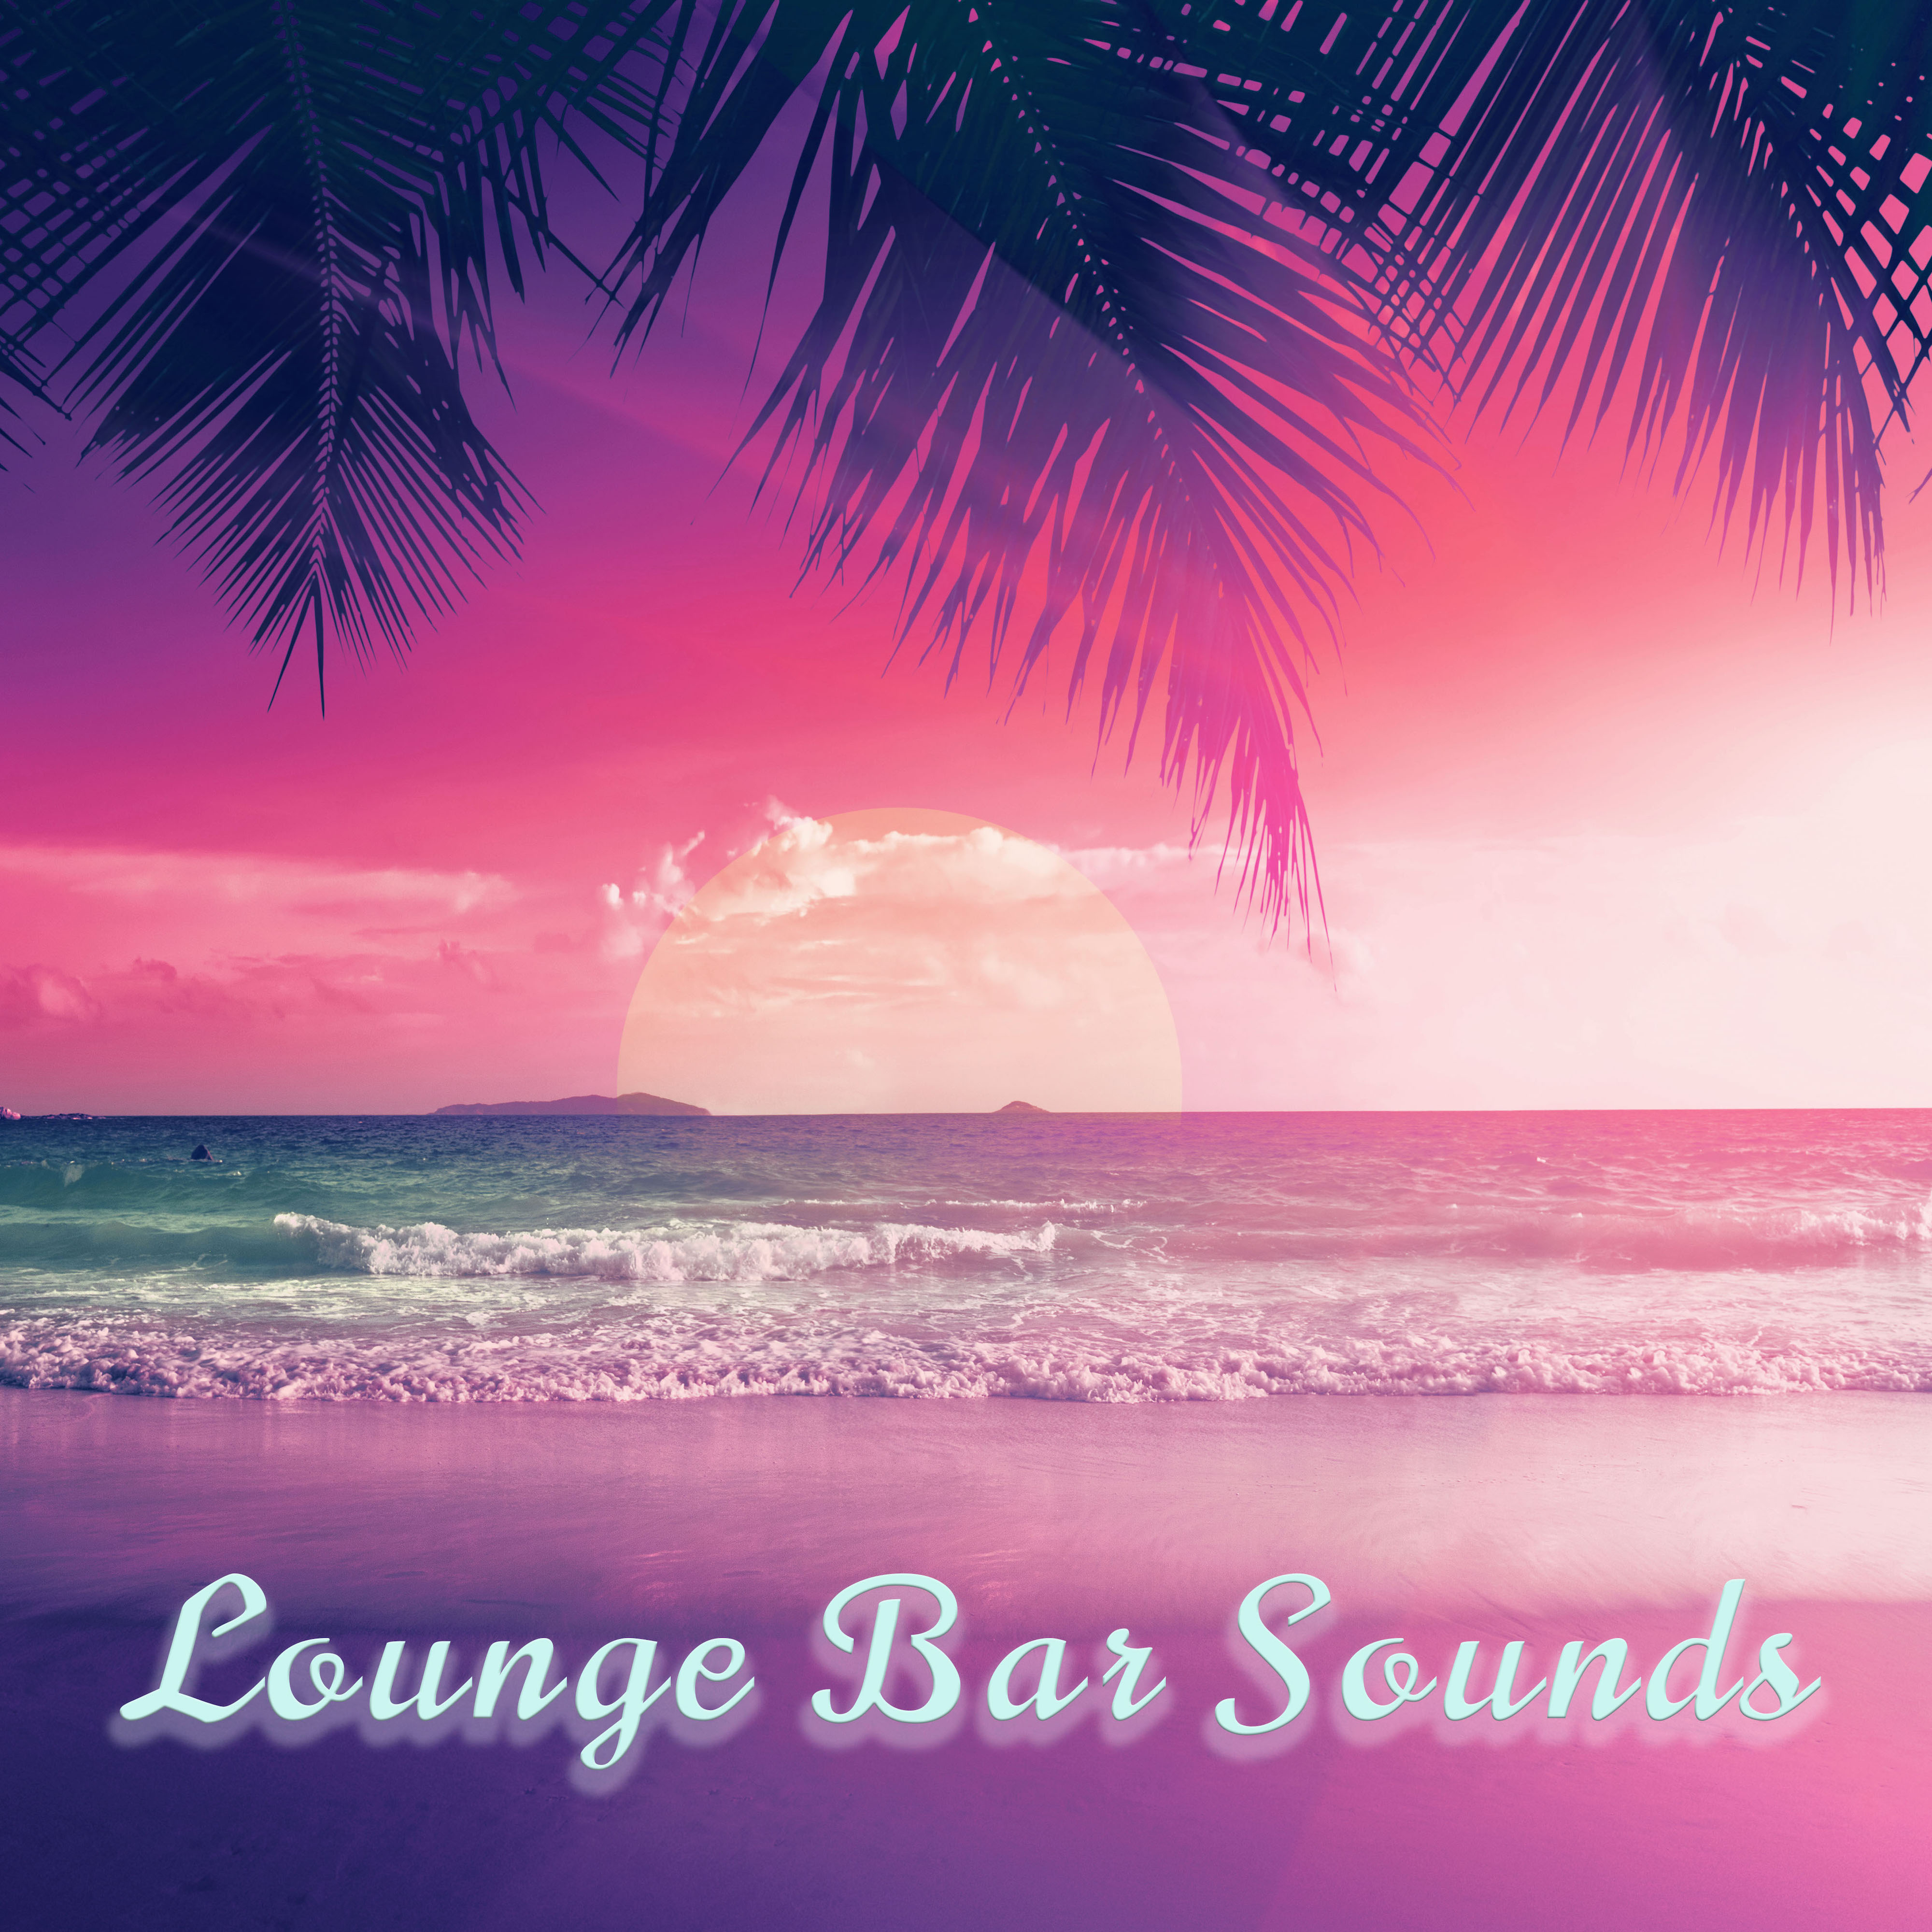 Lounge Bar Sounds For Relaxation - How To Relax Your Mind